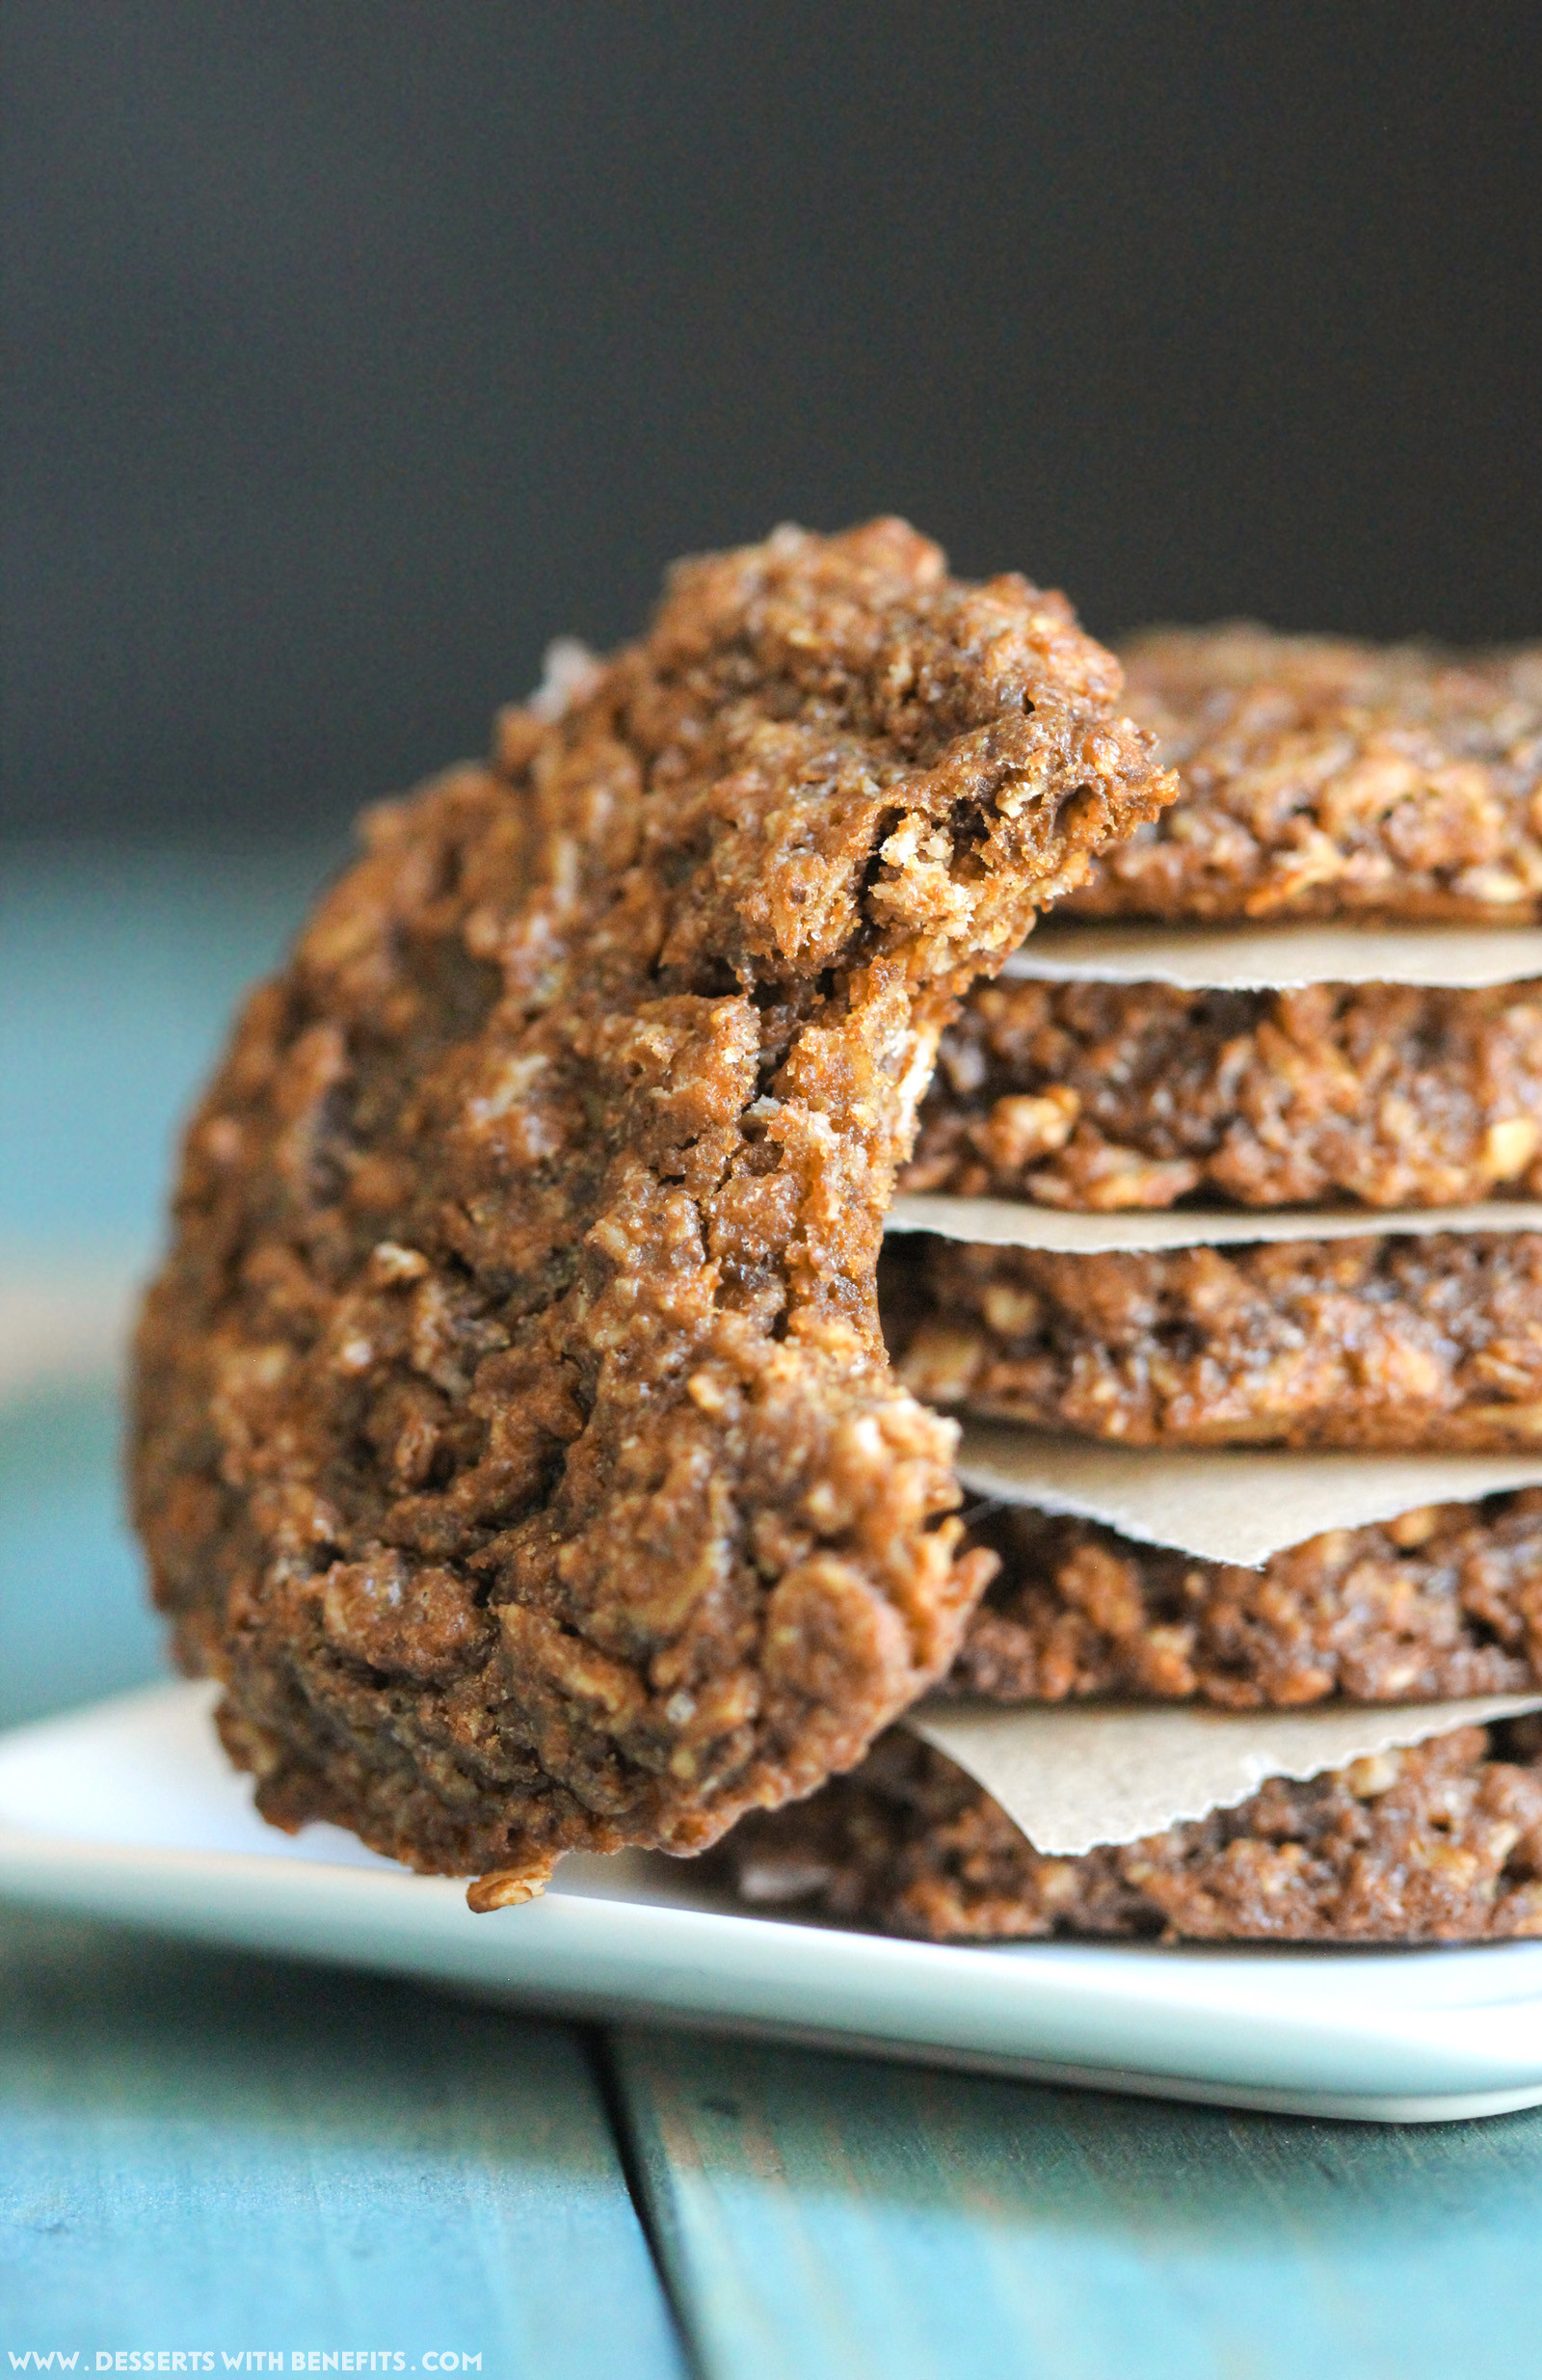 Oatmeal Peanut Butter Cookies Healthy
 Healthy Chewy Peanut Butter Oatmeal Cookies recipe gluten